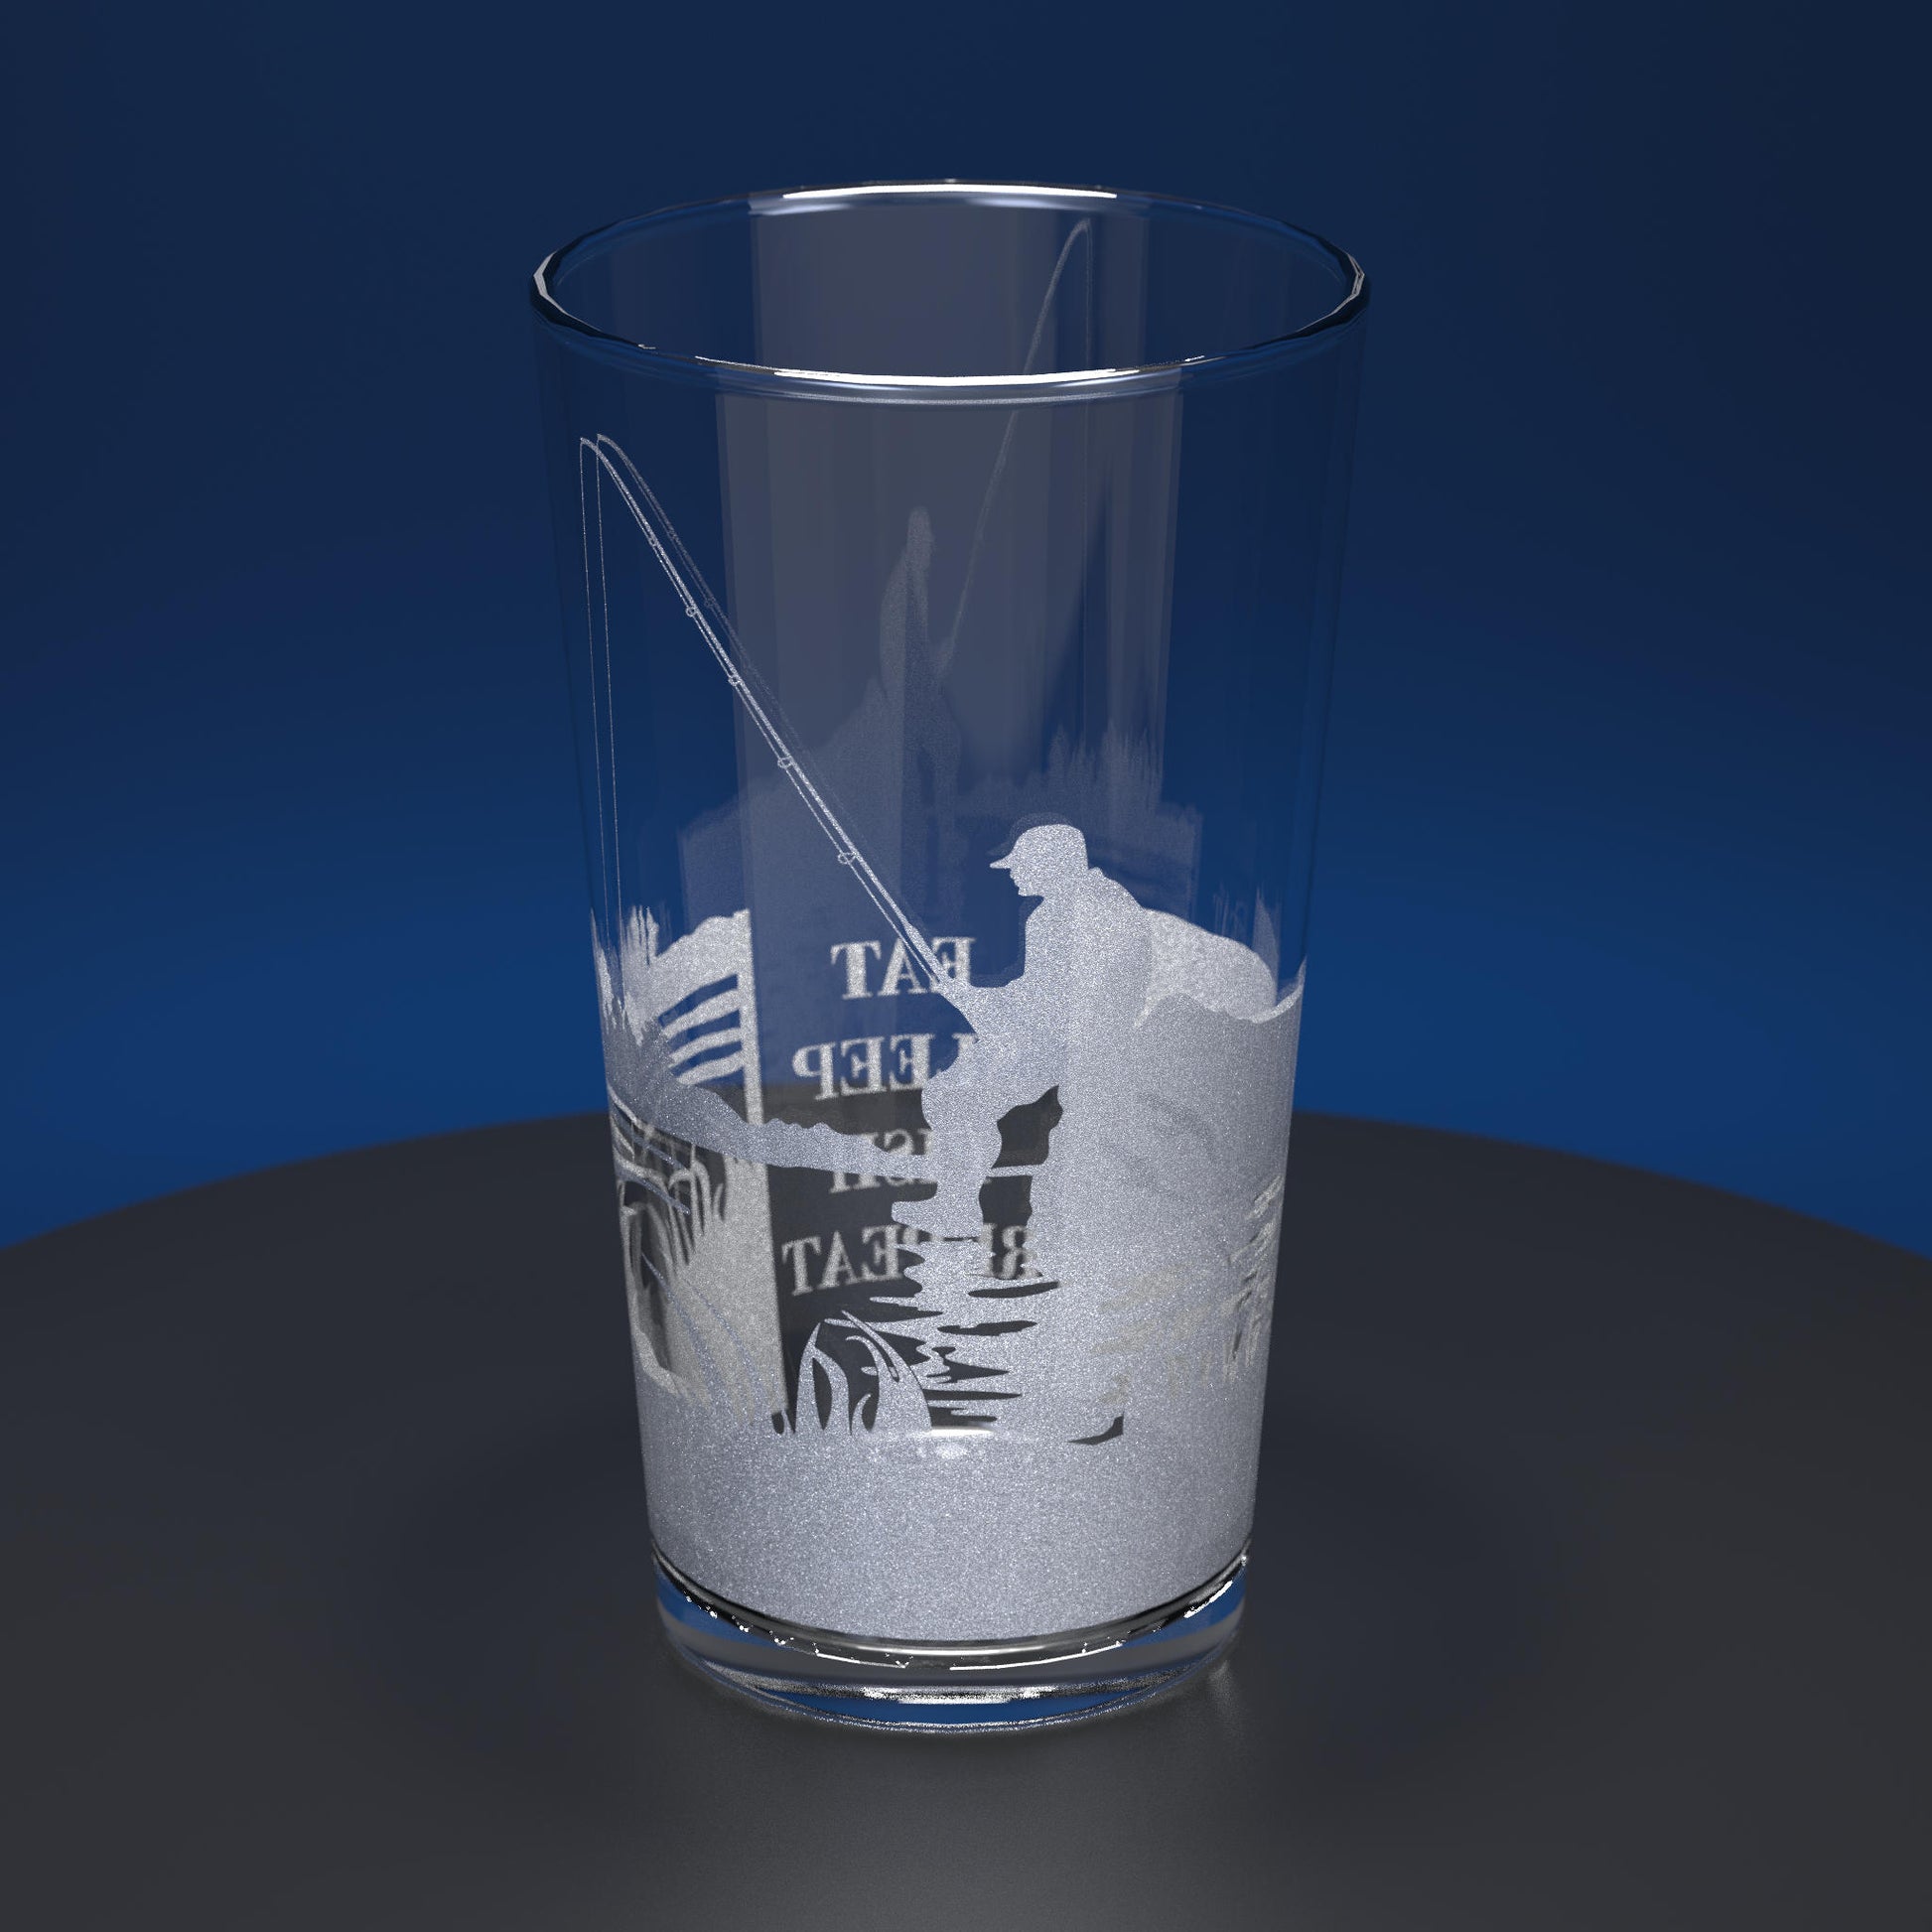 Pint glass engraved with fishing theme and Eat, Sleep, Fish, Repeat text